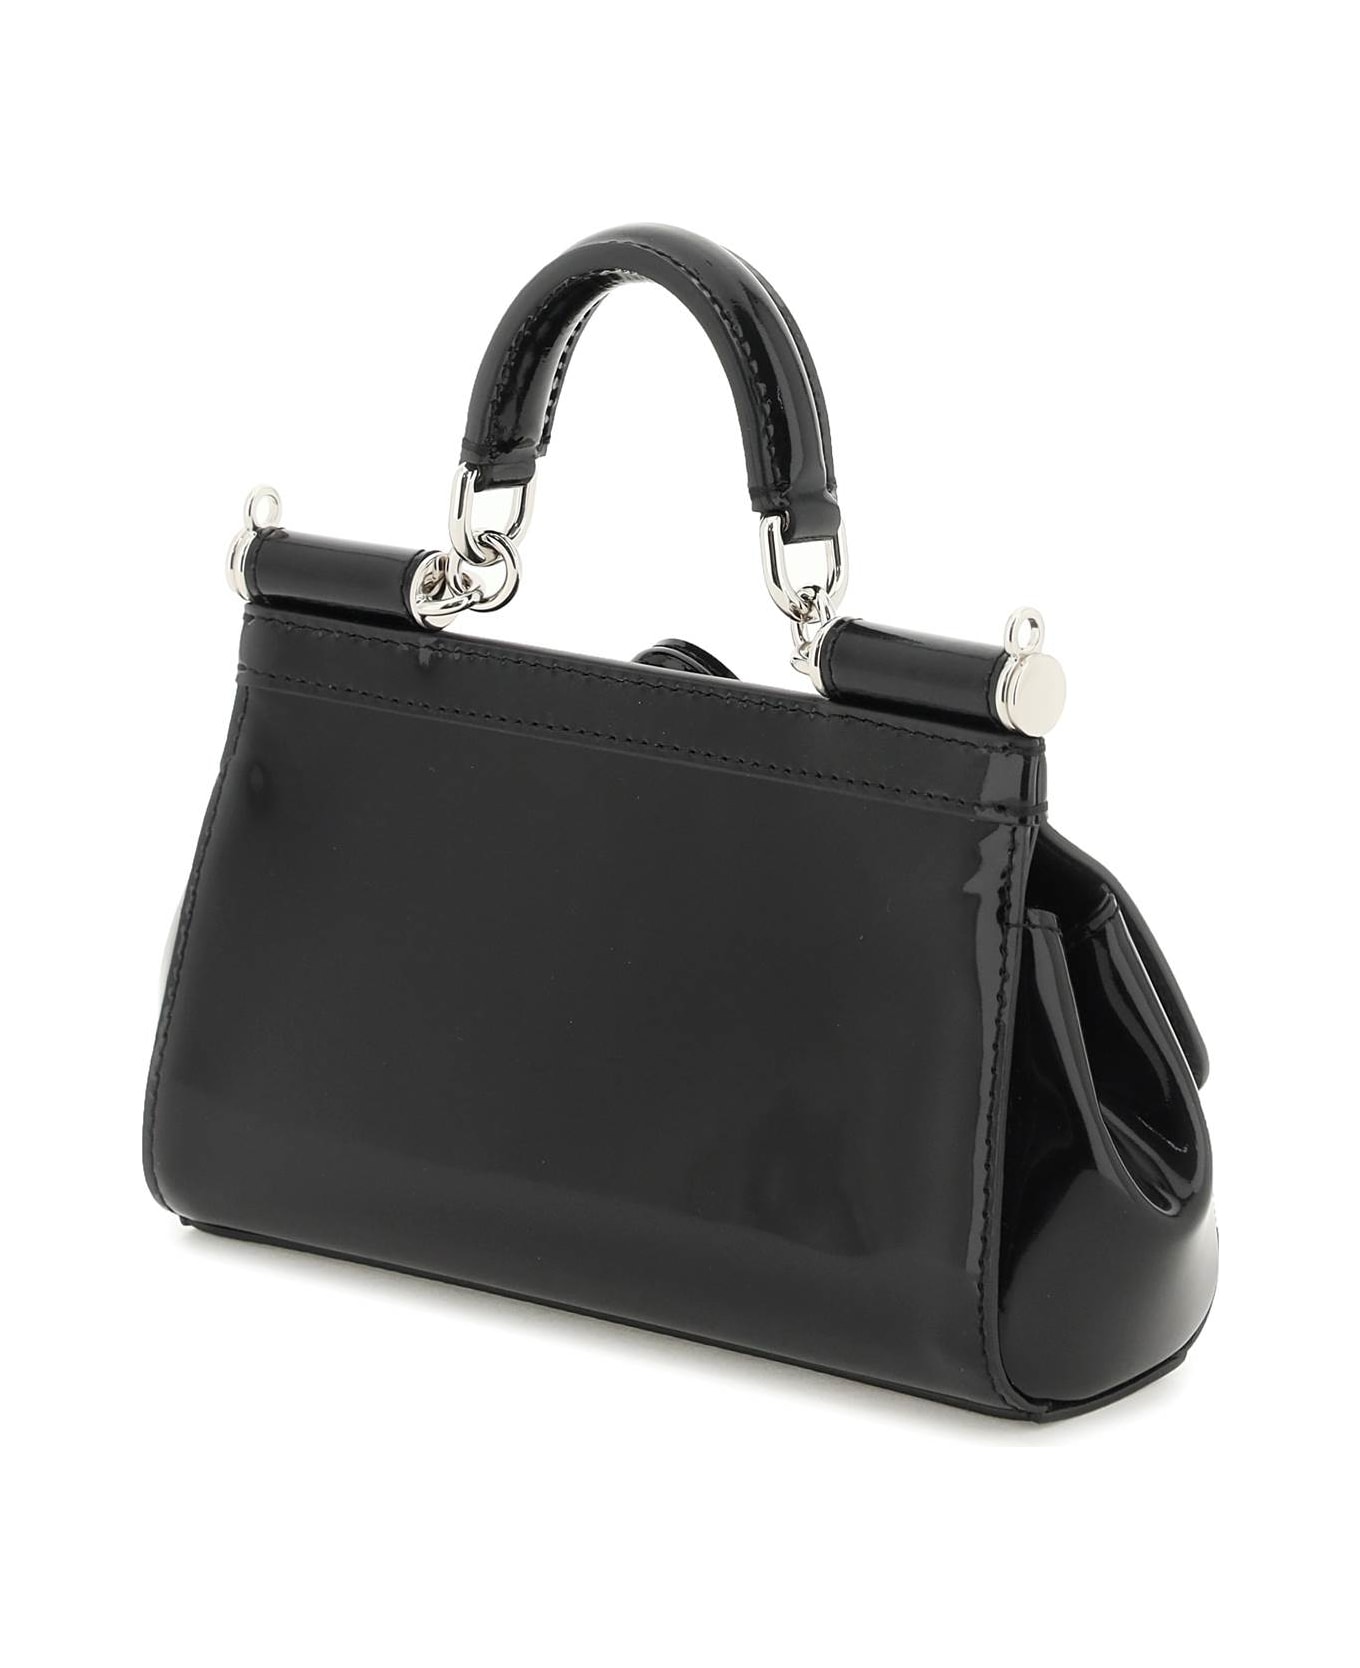 Dolce & Gabbana Patent Leather Small 'sicily' Bag With Coin Purse - Black